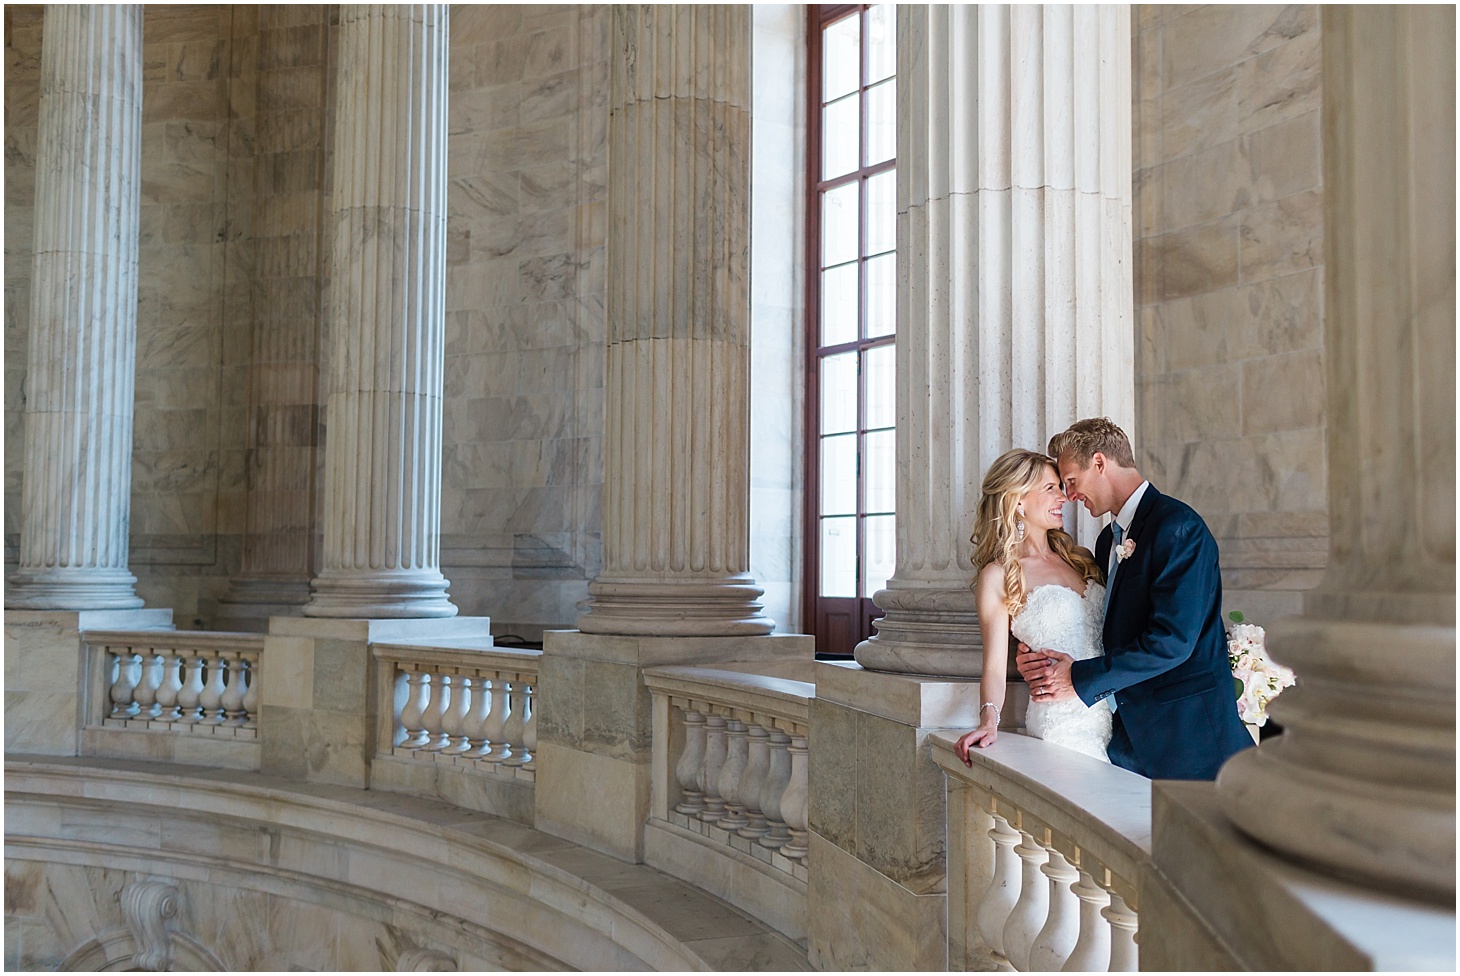 Wedding Portraits in US Capitol, Navy and Blush Summer Wedding at the Army and Navy Club, Ceremony at Capitol Hill Baptist Church, Sarah Bradshaw Photography, DC Wedding Photographer